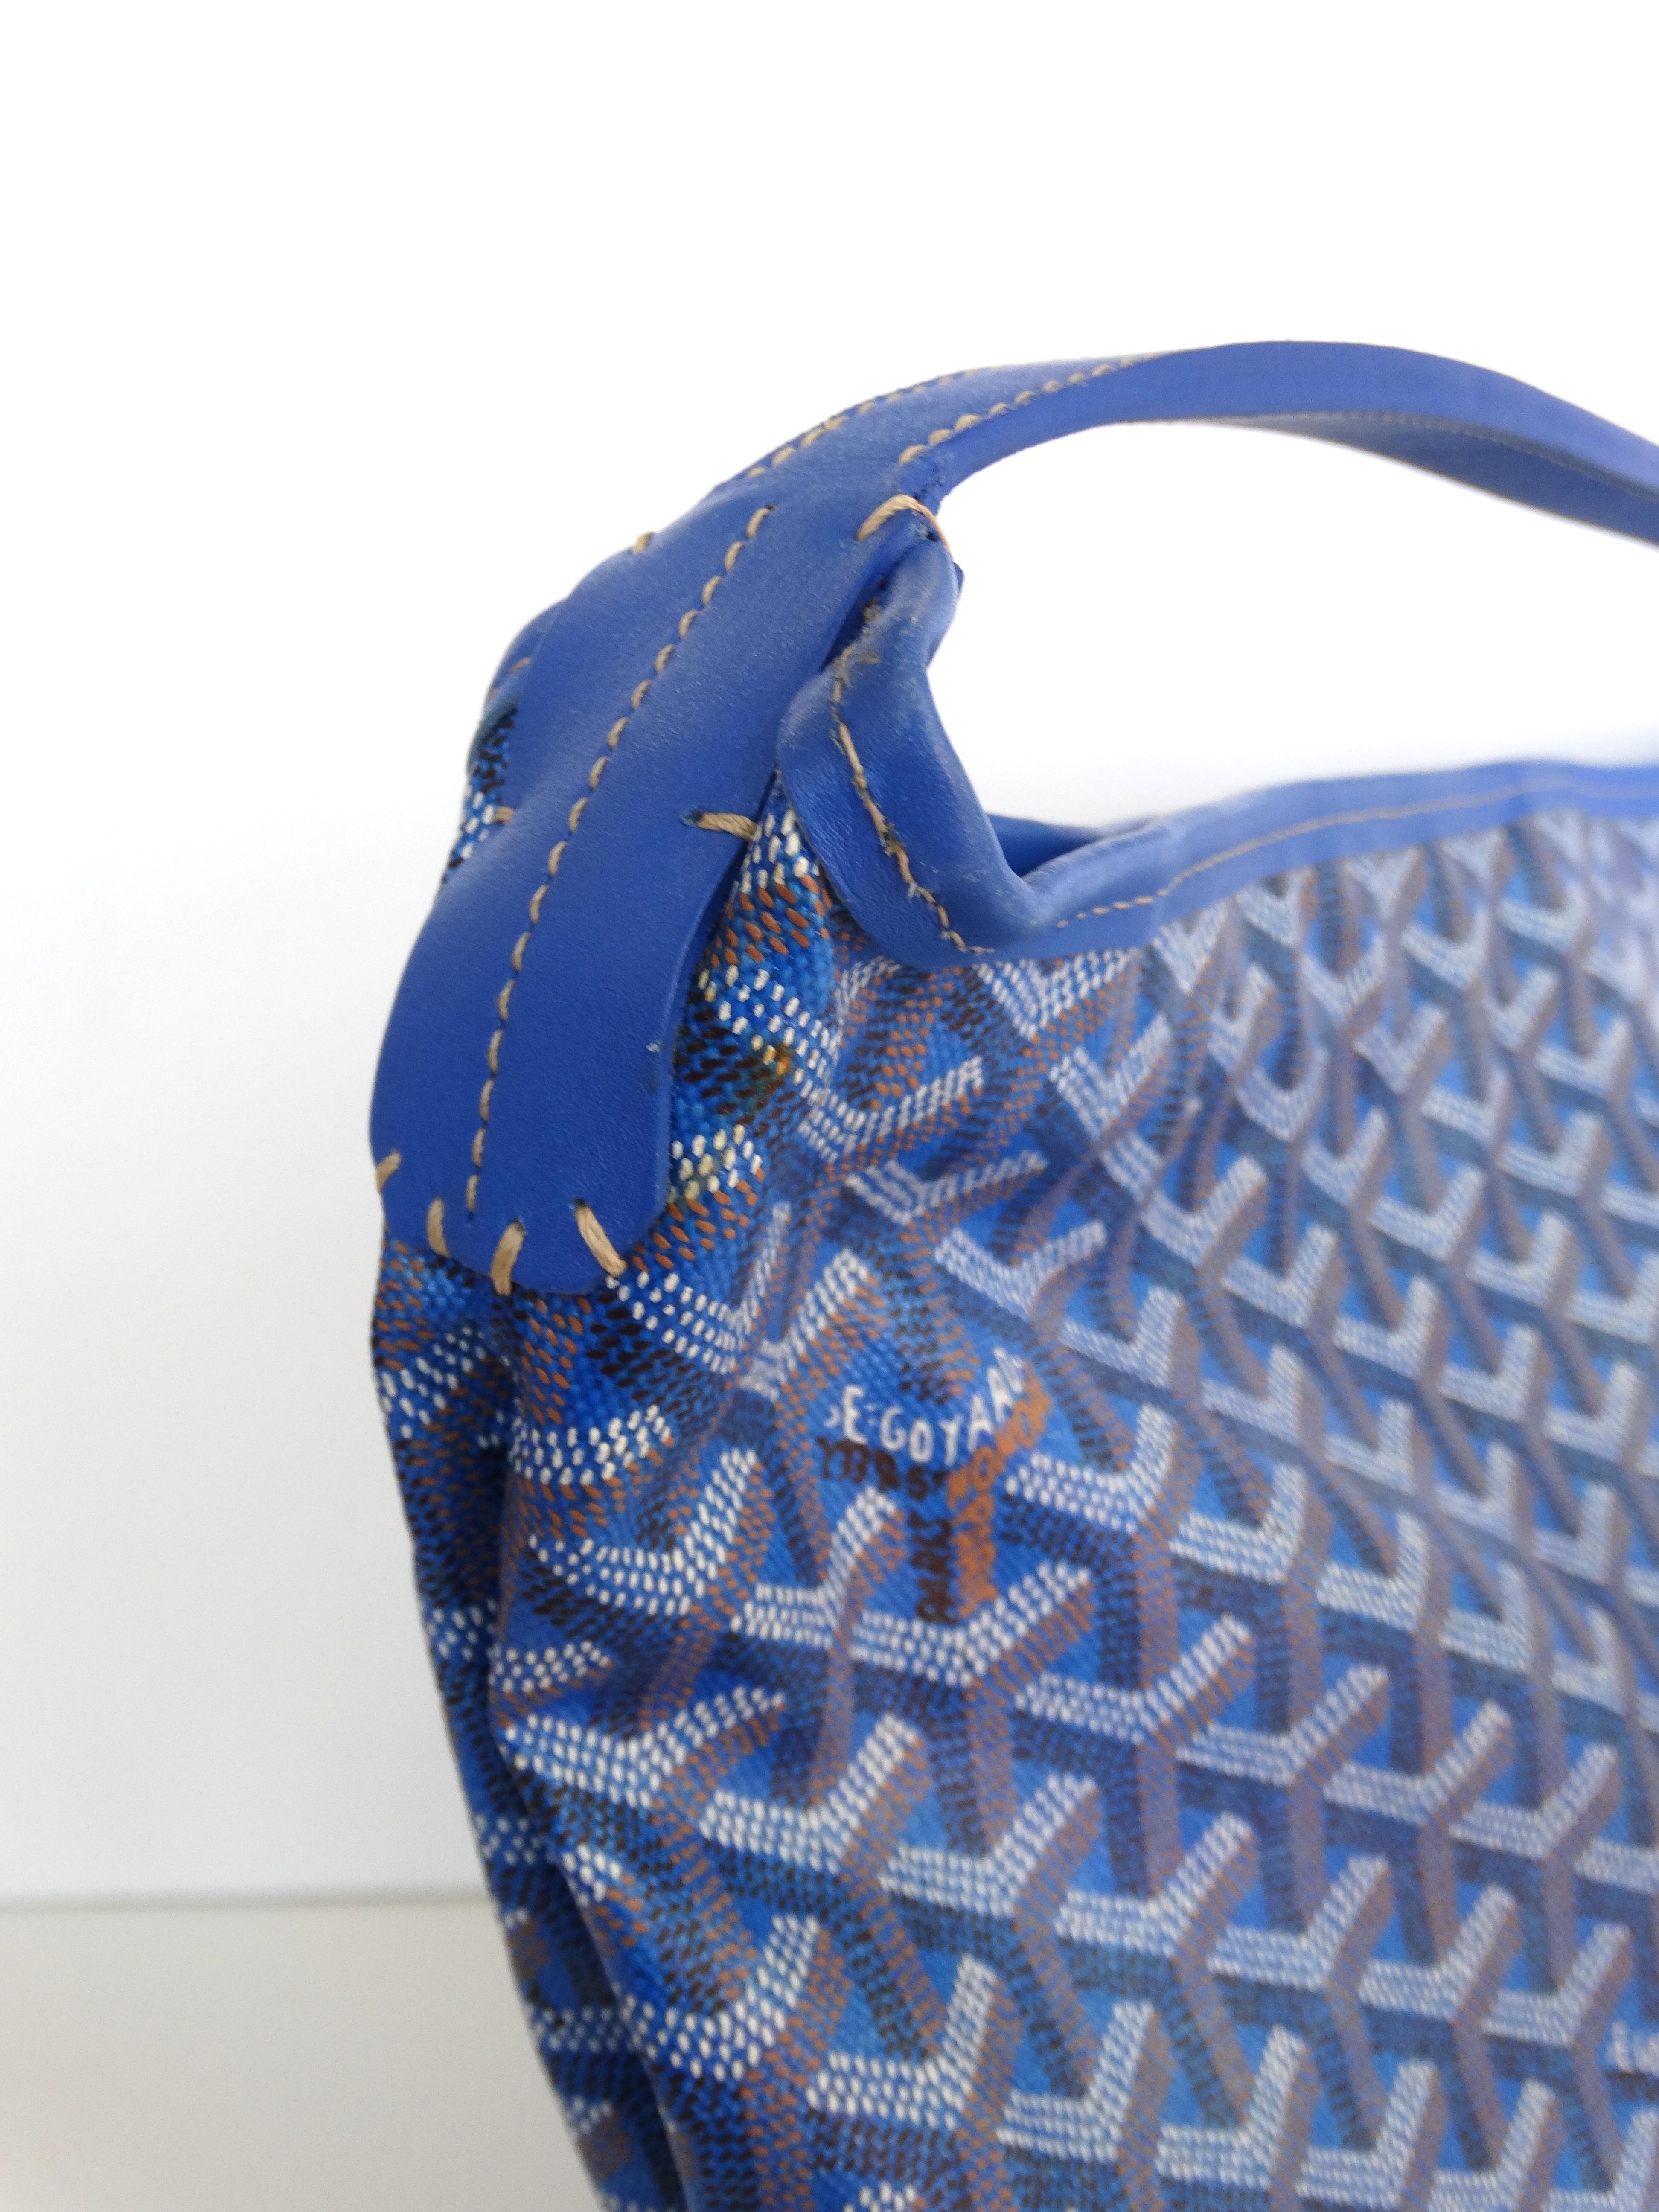 The Perfect Tote Bag For Every Day! Circa 1990s, this particular style is no longer in production, making it the perfect vintage item! This Goyard  Fidji hobo bag features the iconic Goyard monogram all over with hints of rust orange and is made of